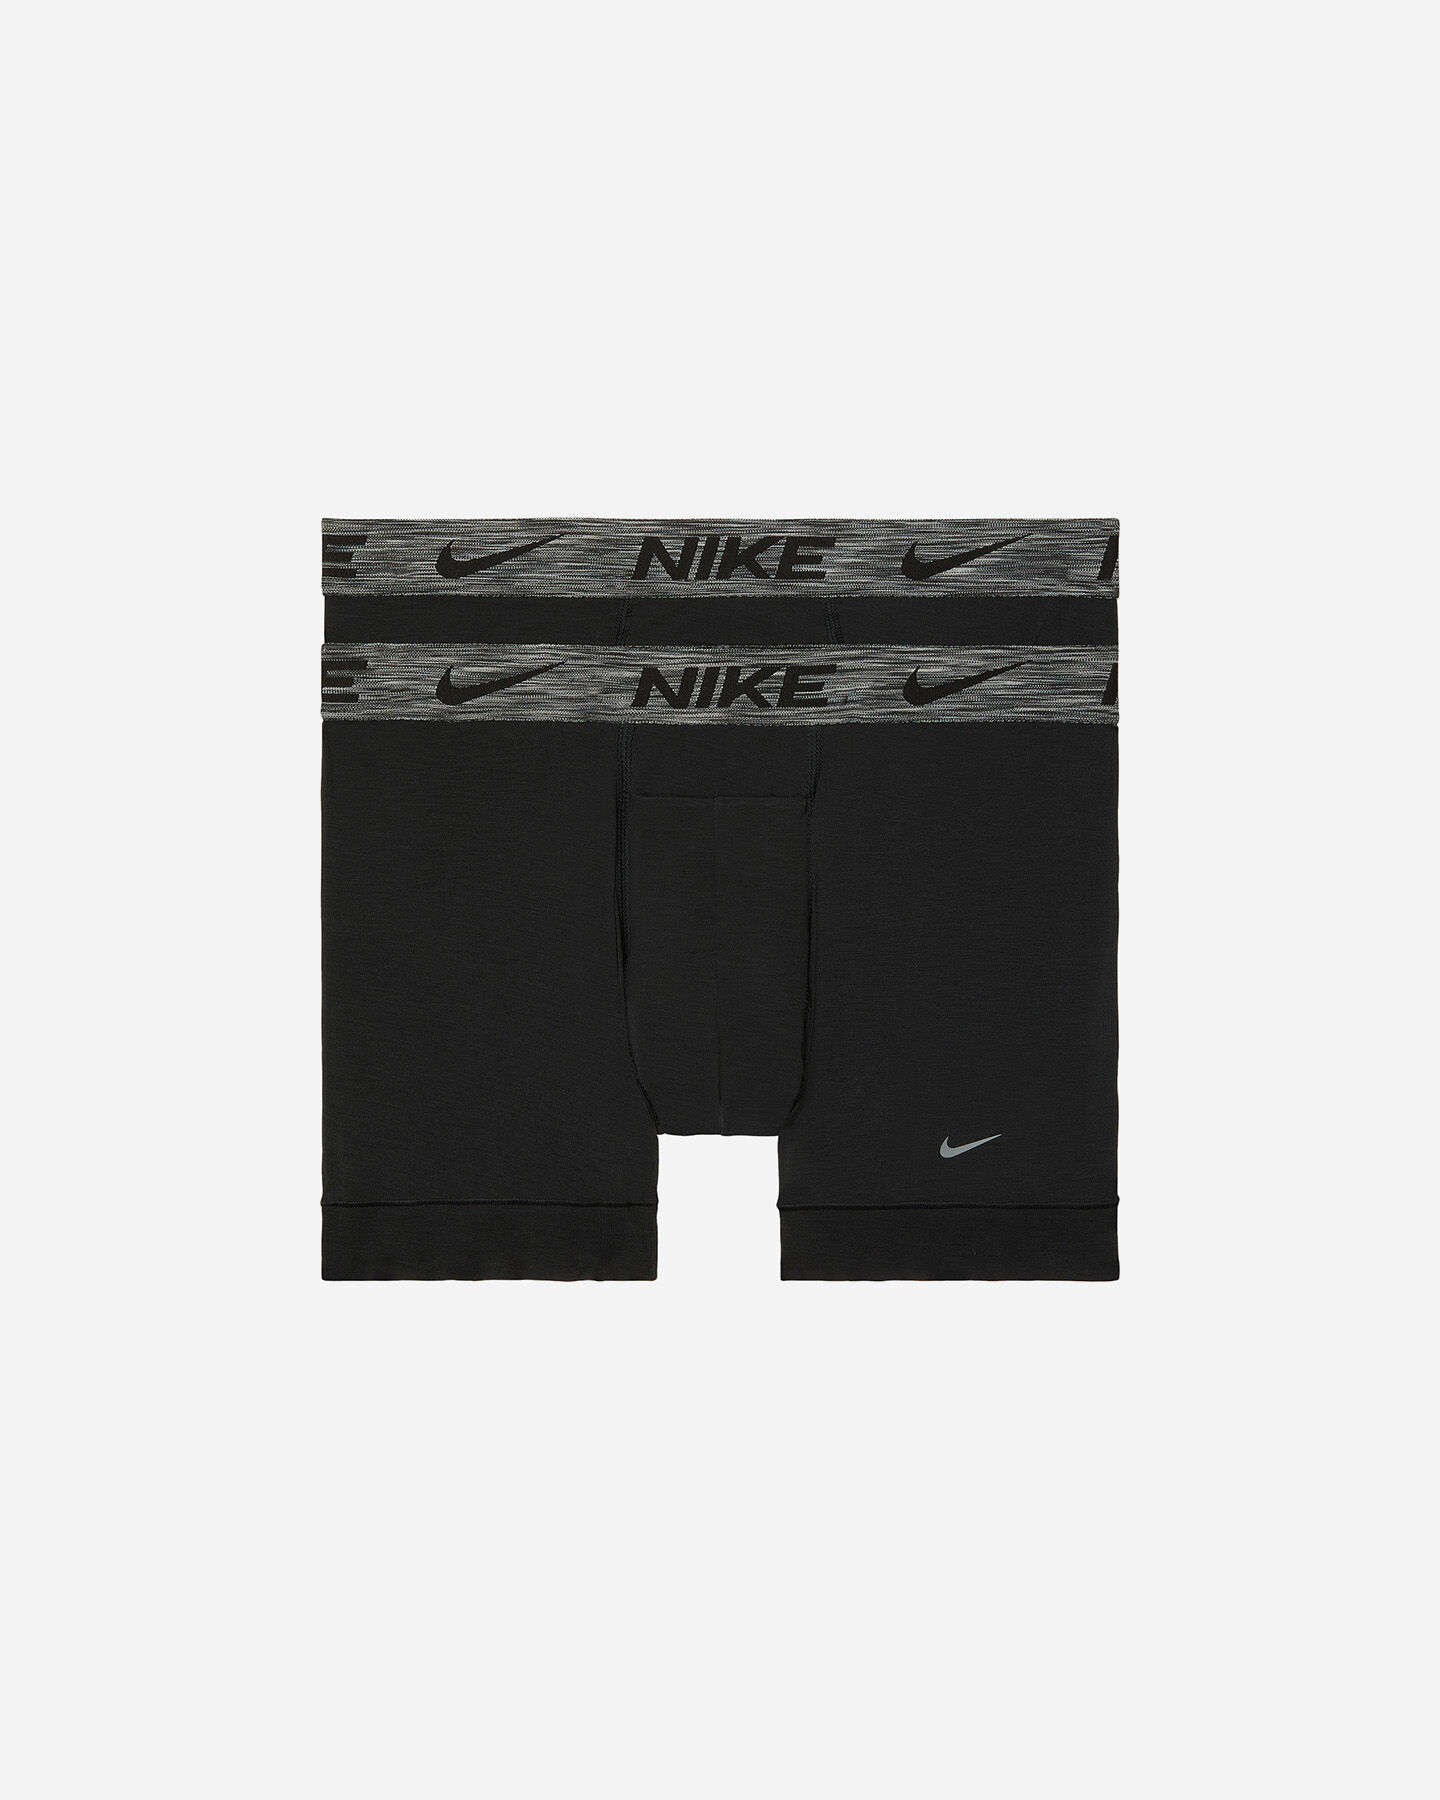  Intimo NIKE 2PACK BOXER RELUX M S4099896|UB1|S scatto 0